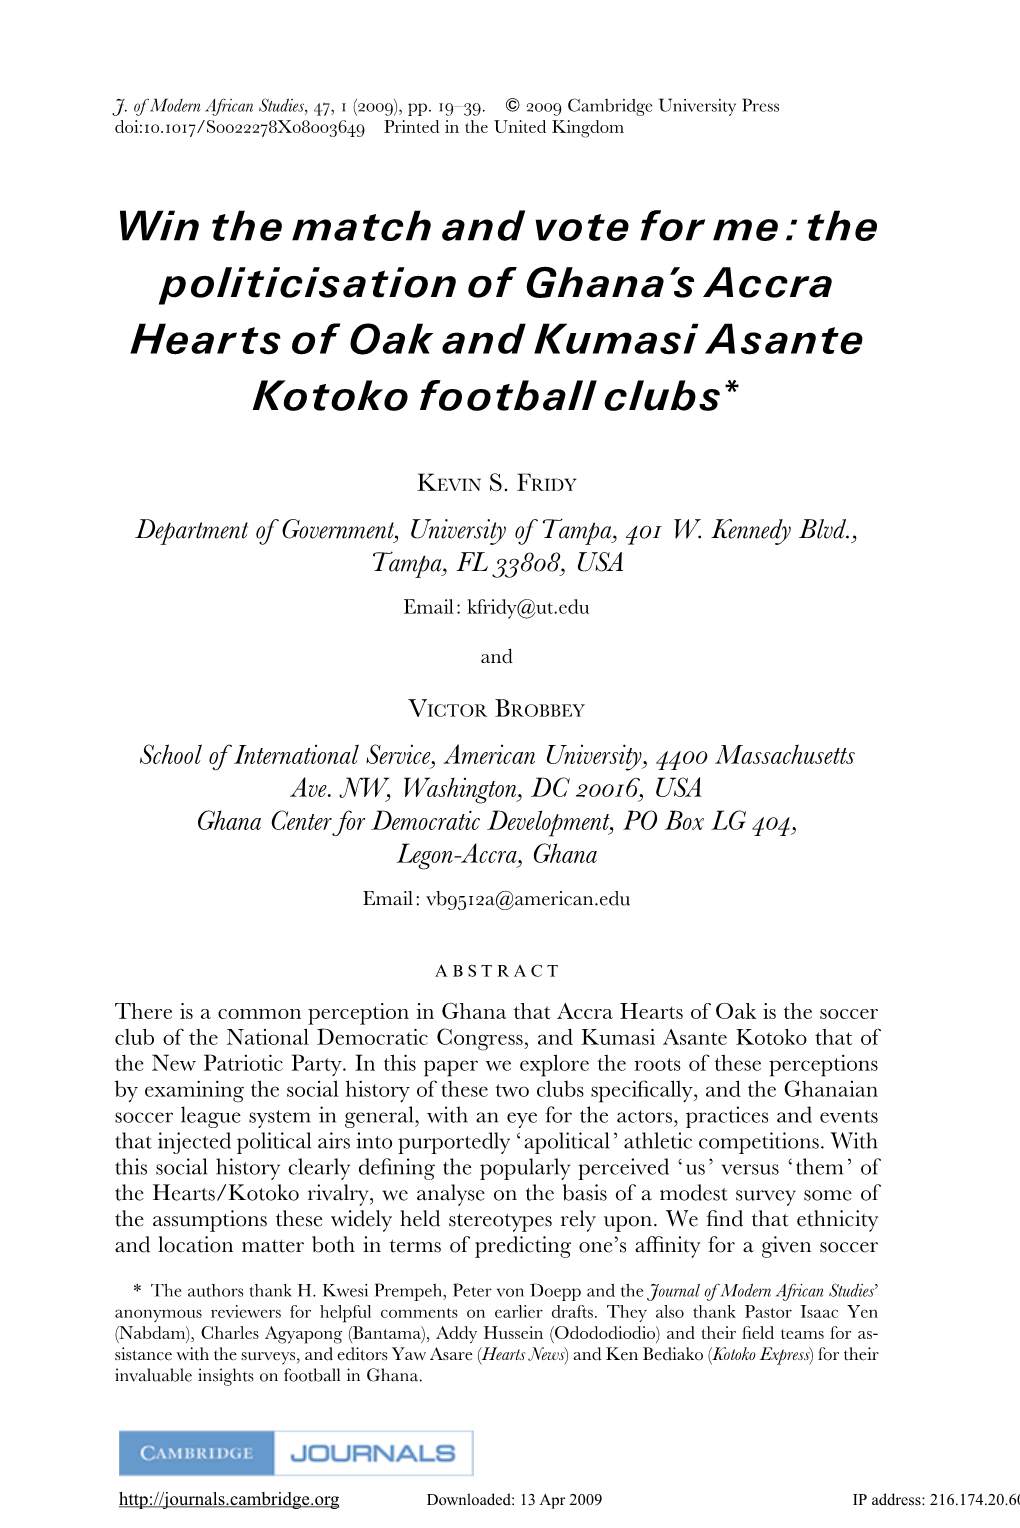 Win the Match and Vote for Me: the Politicisation of Ghana's Accra